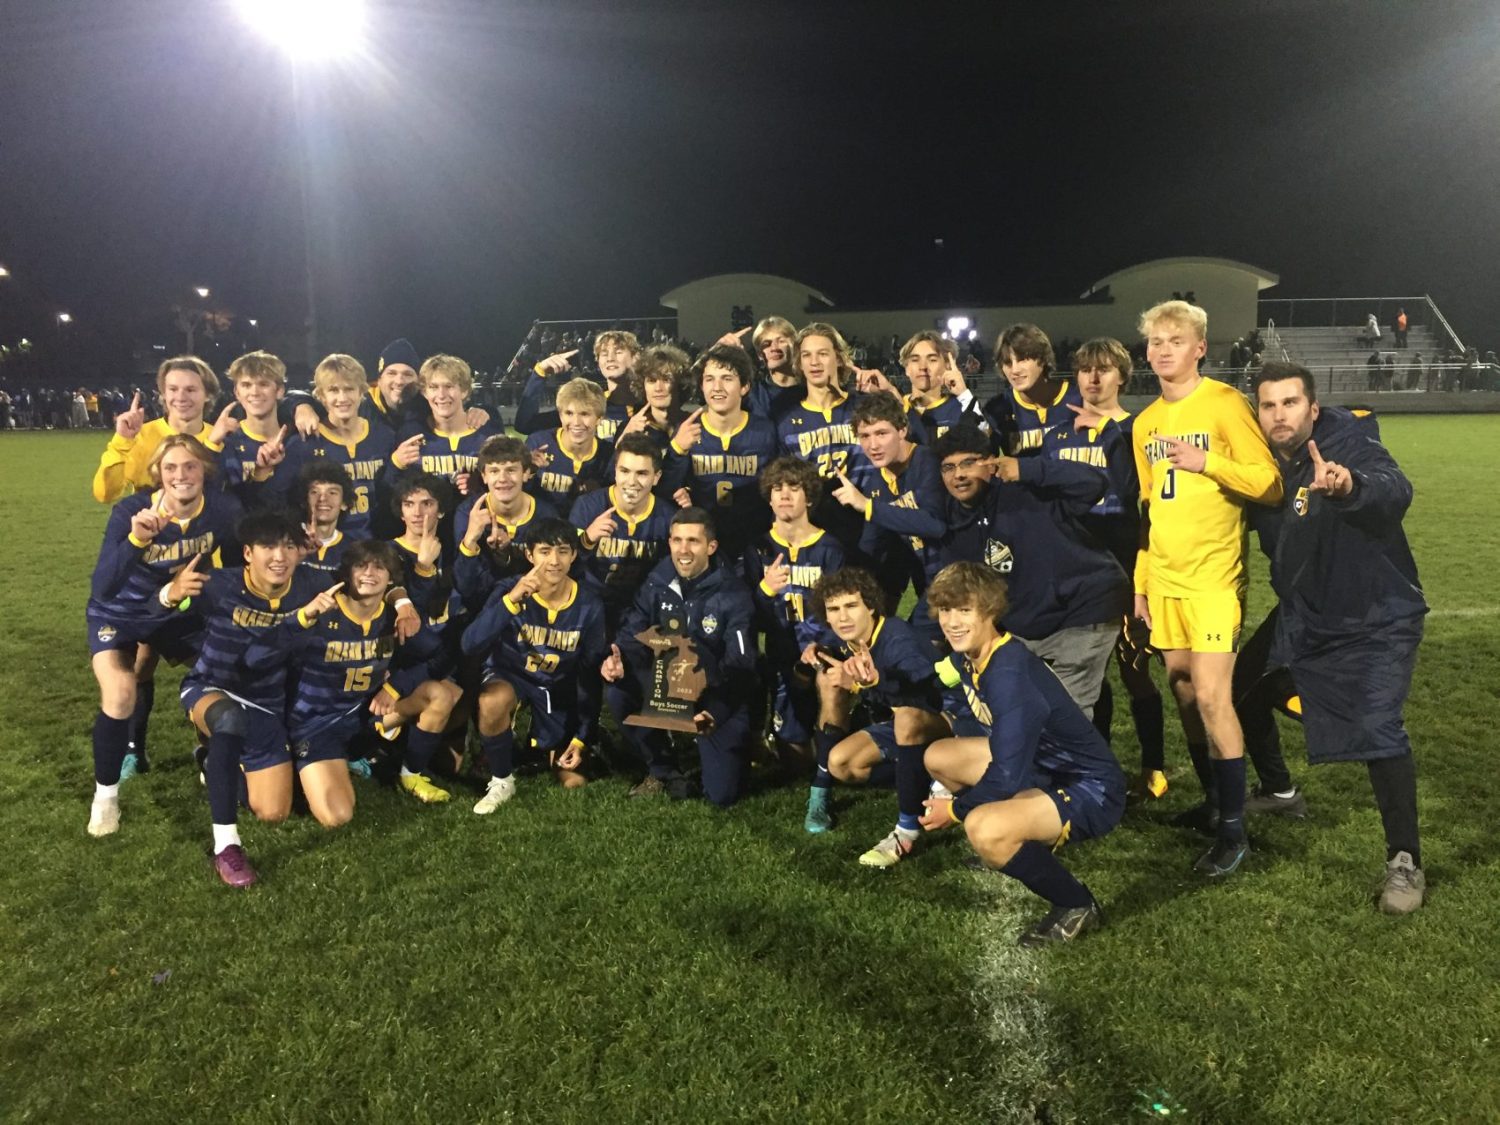 Grand Haven falls to highly ranked Rockford in Division 1 regional soccer